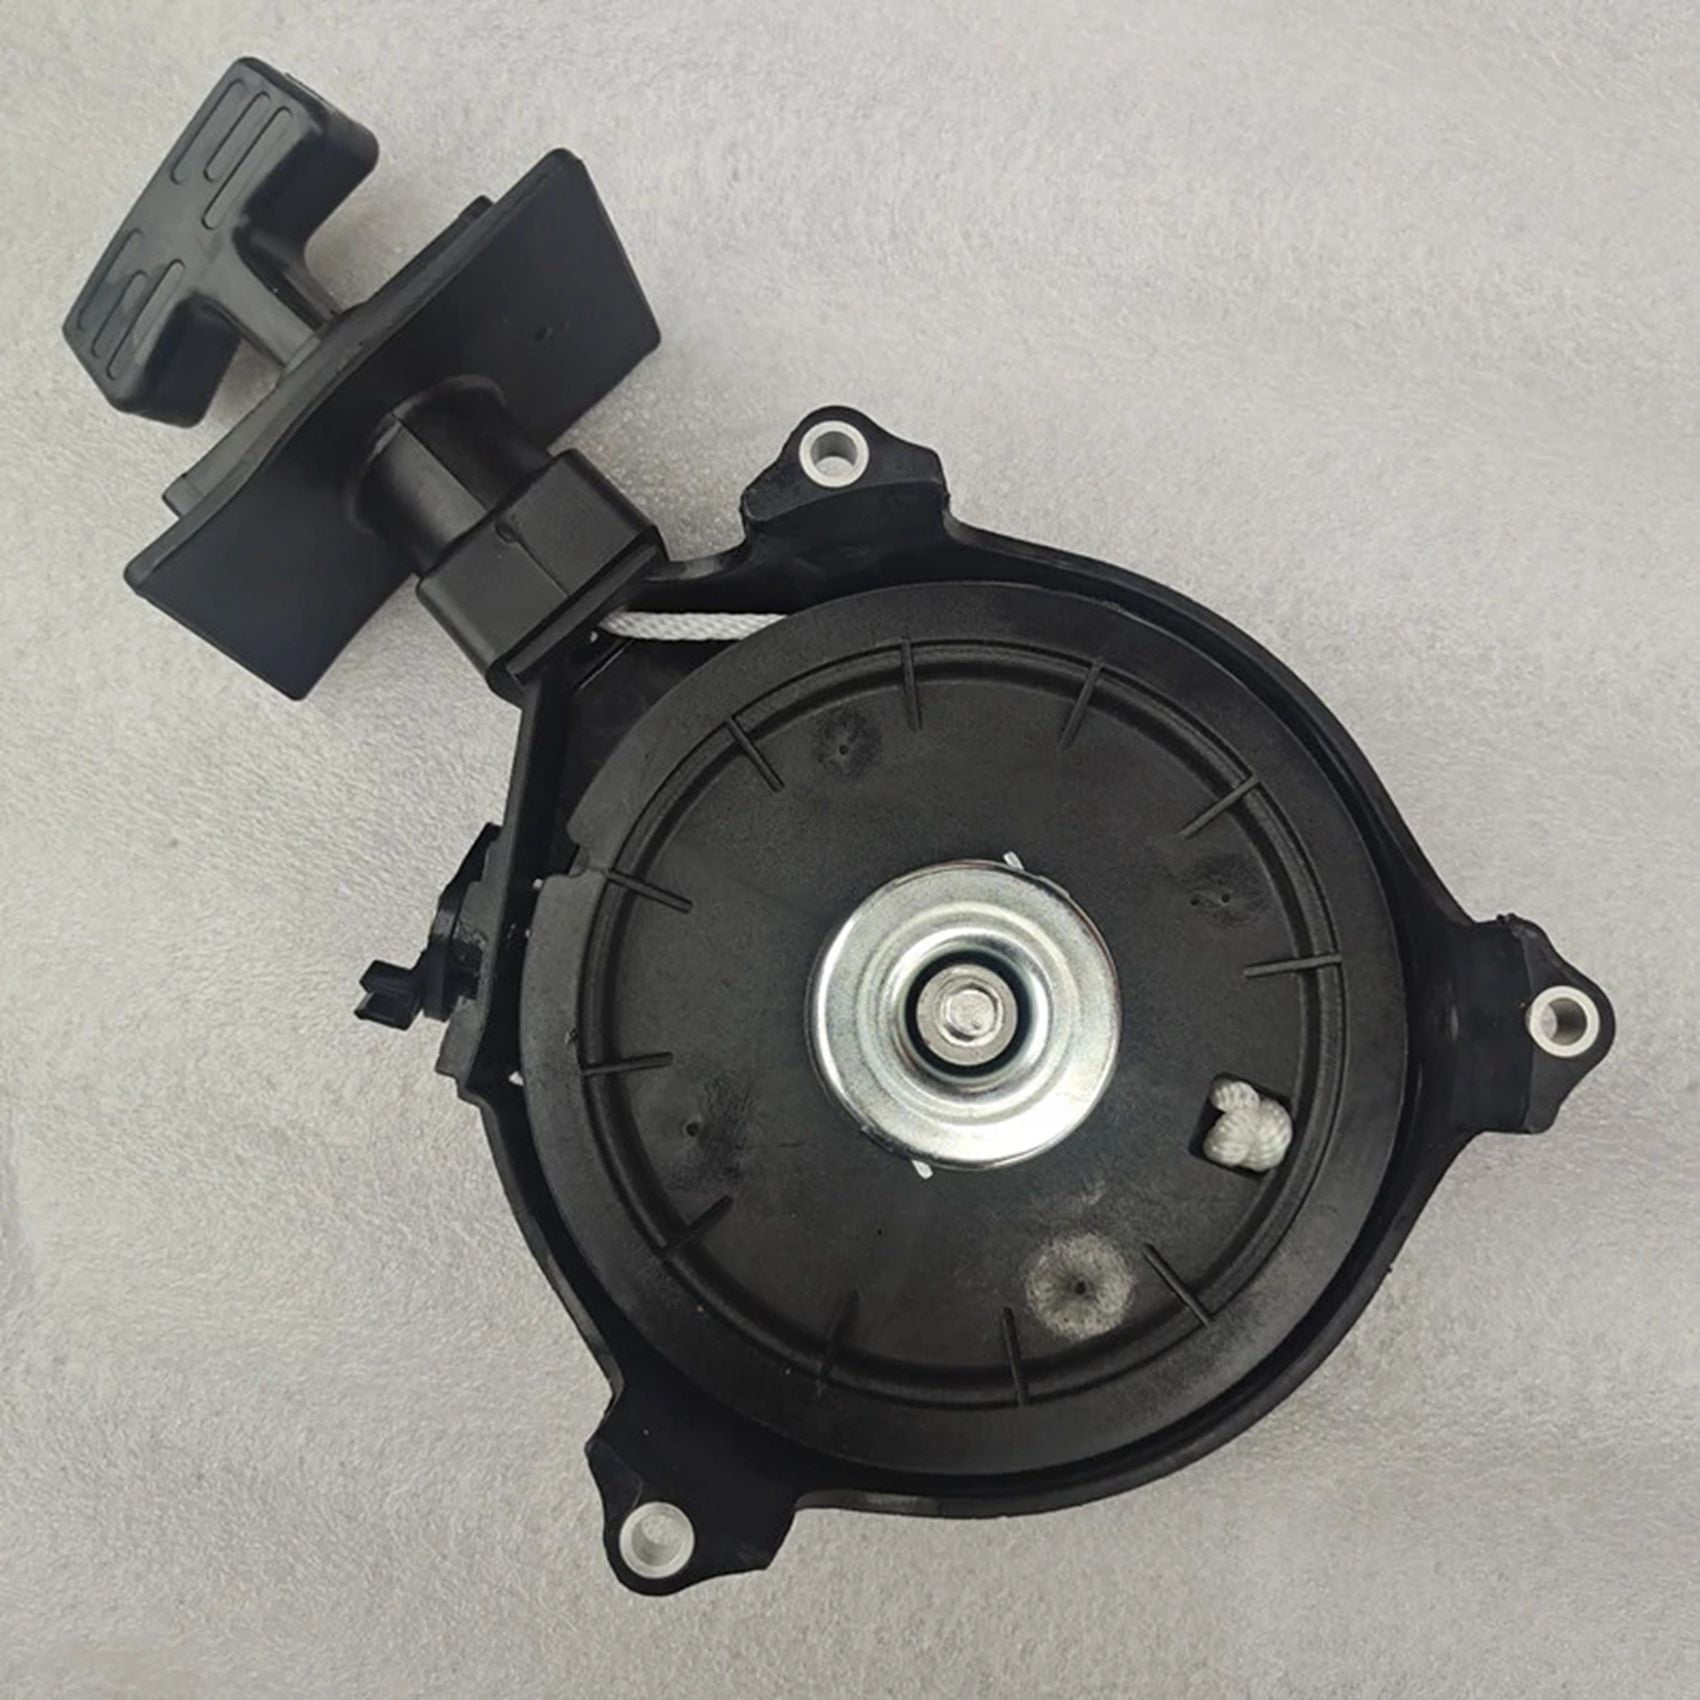 Outboard Motor Parts Starter Assembly for Tohatsu Hidea Hyfong 2